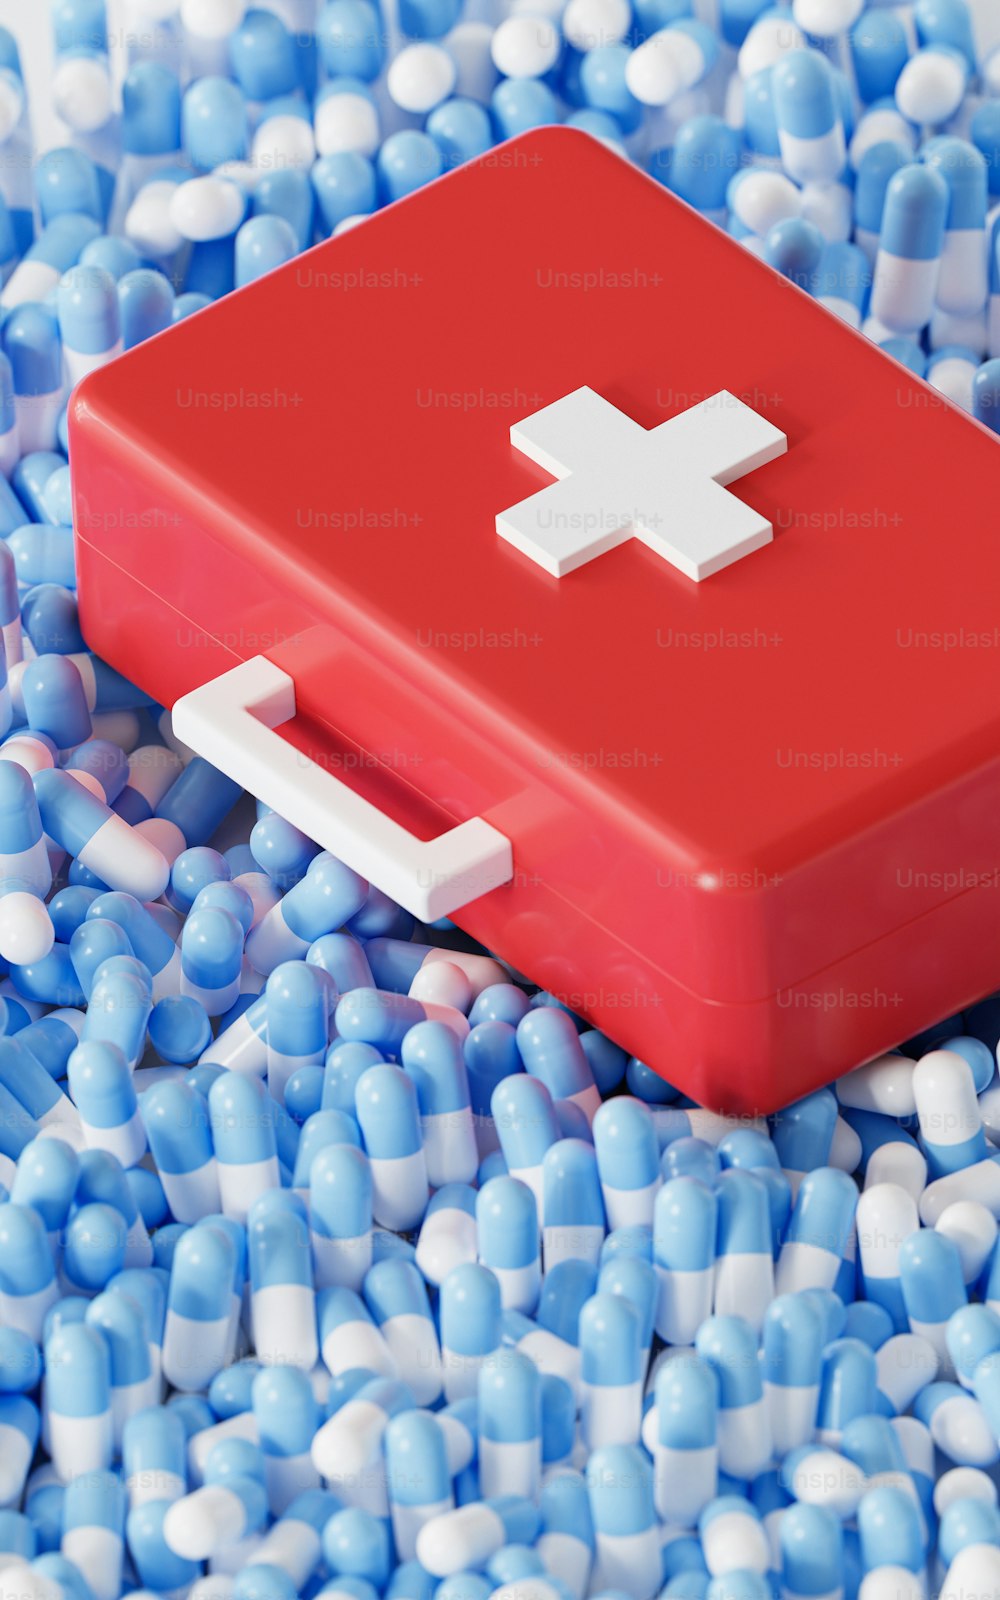 a red box with a white cross on it surrounded by blue and white pills